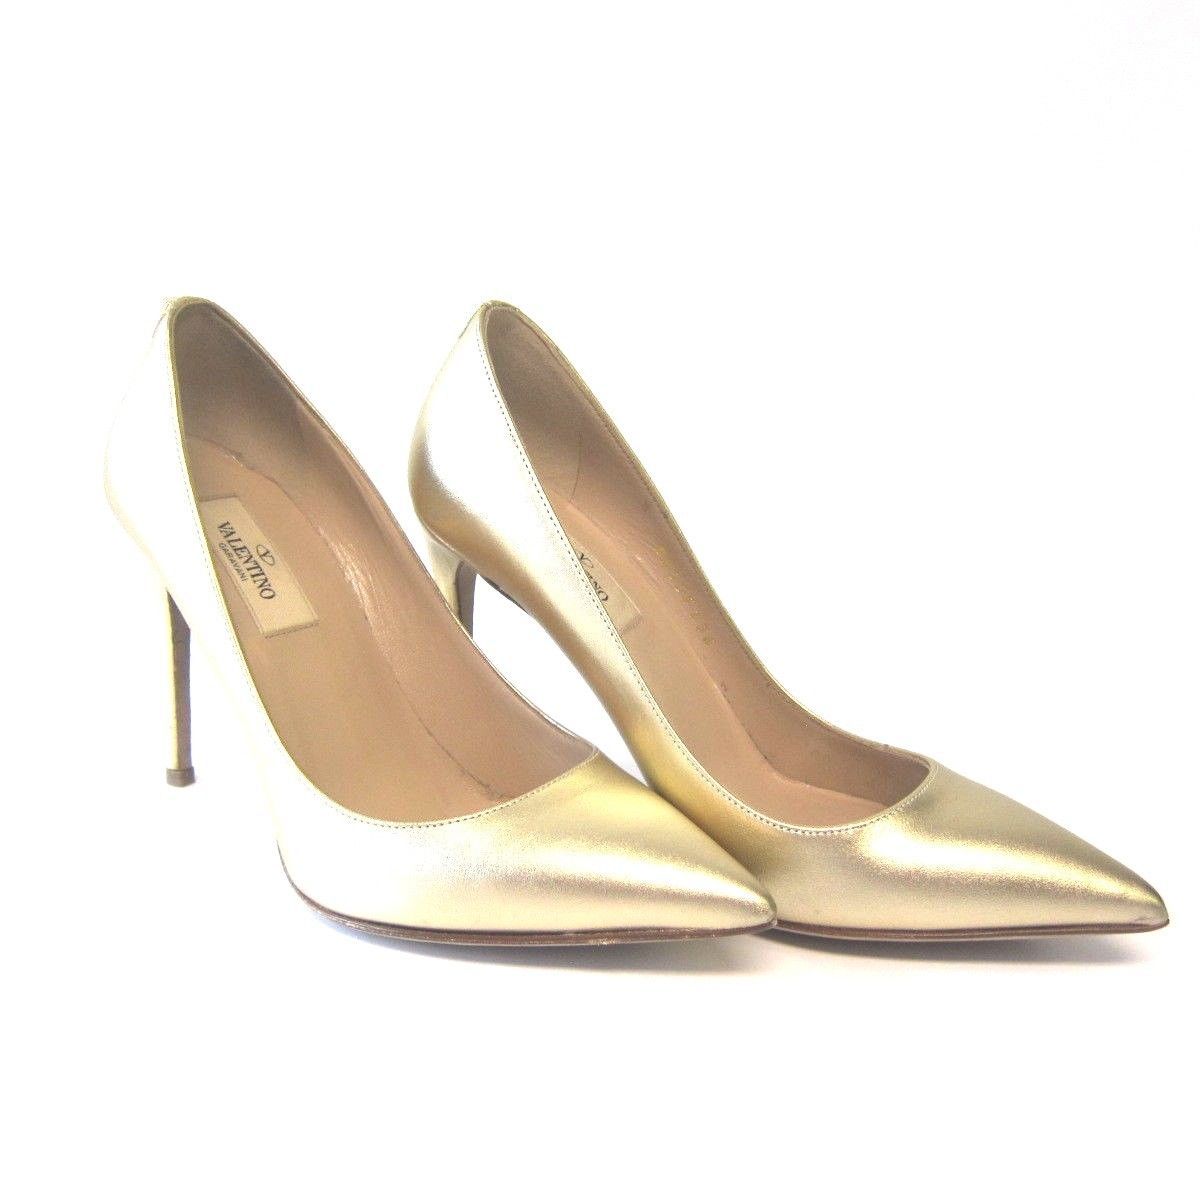 J-304292 New Valentino Gold Pump Heel Shoes Size US 6/Marked 36 - Heels